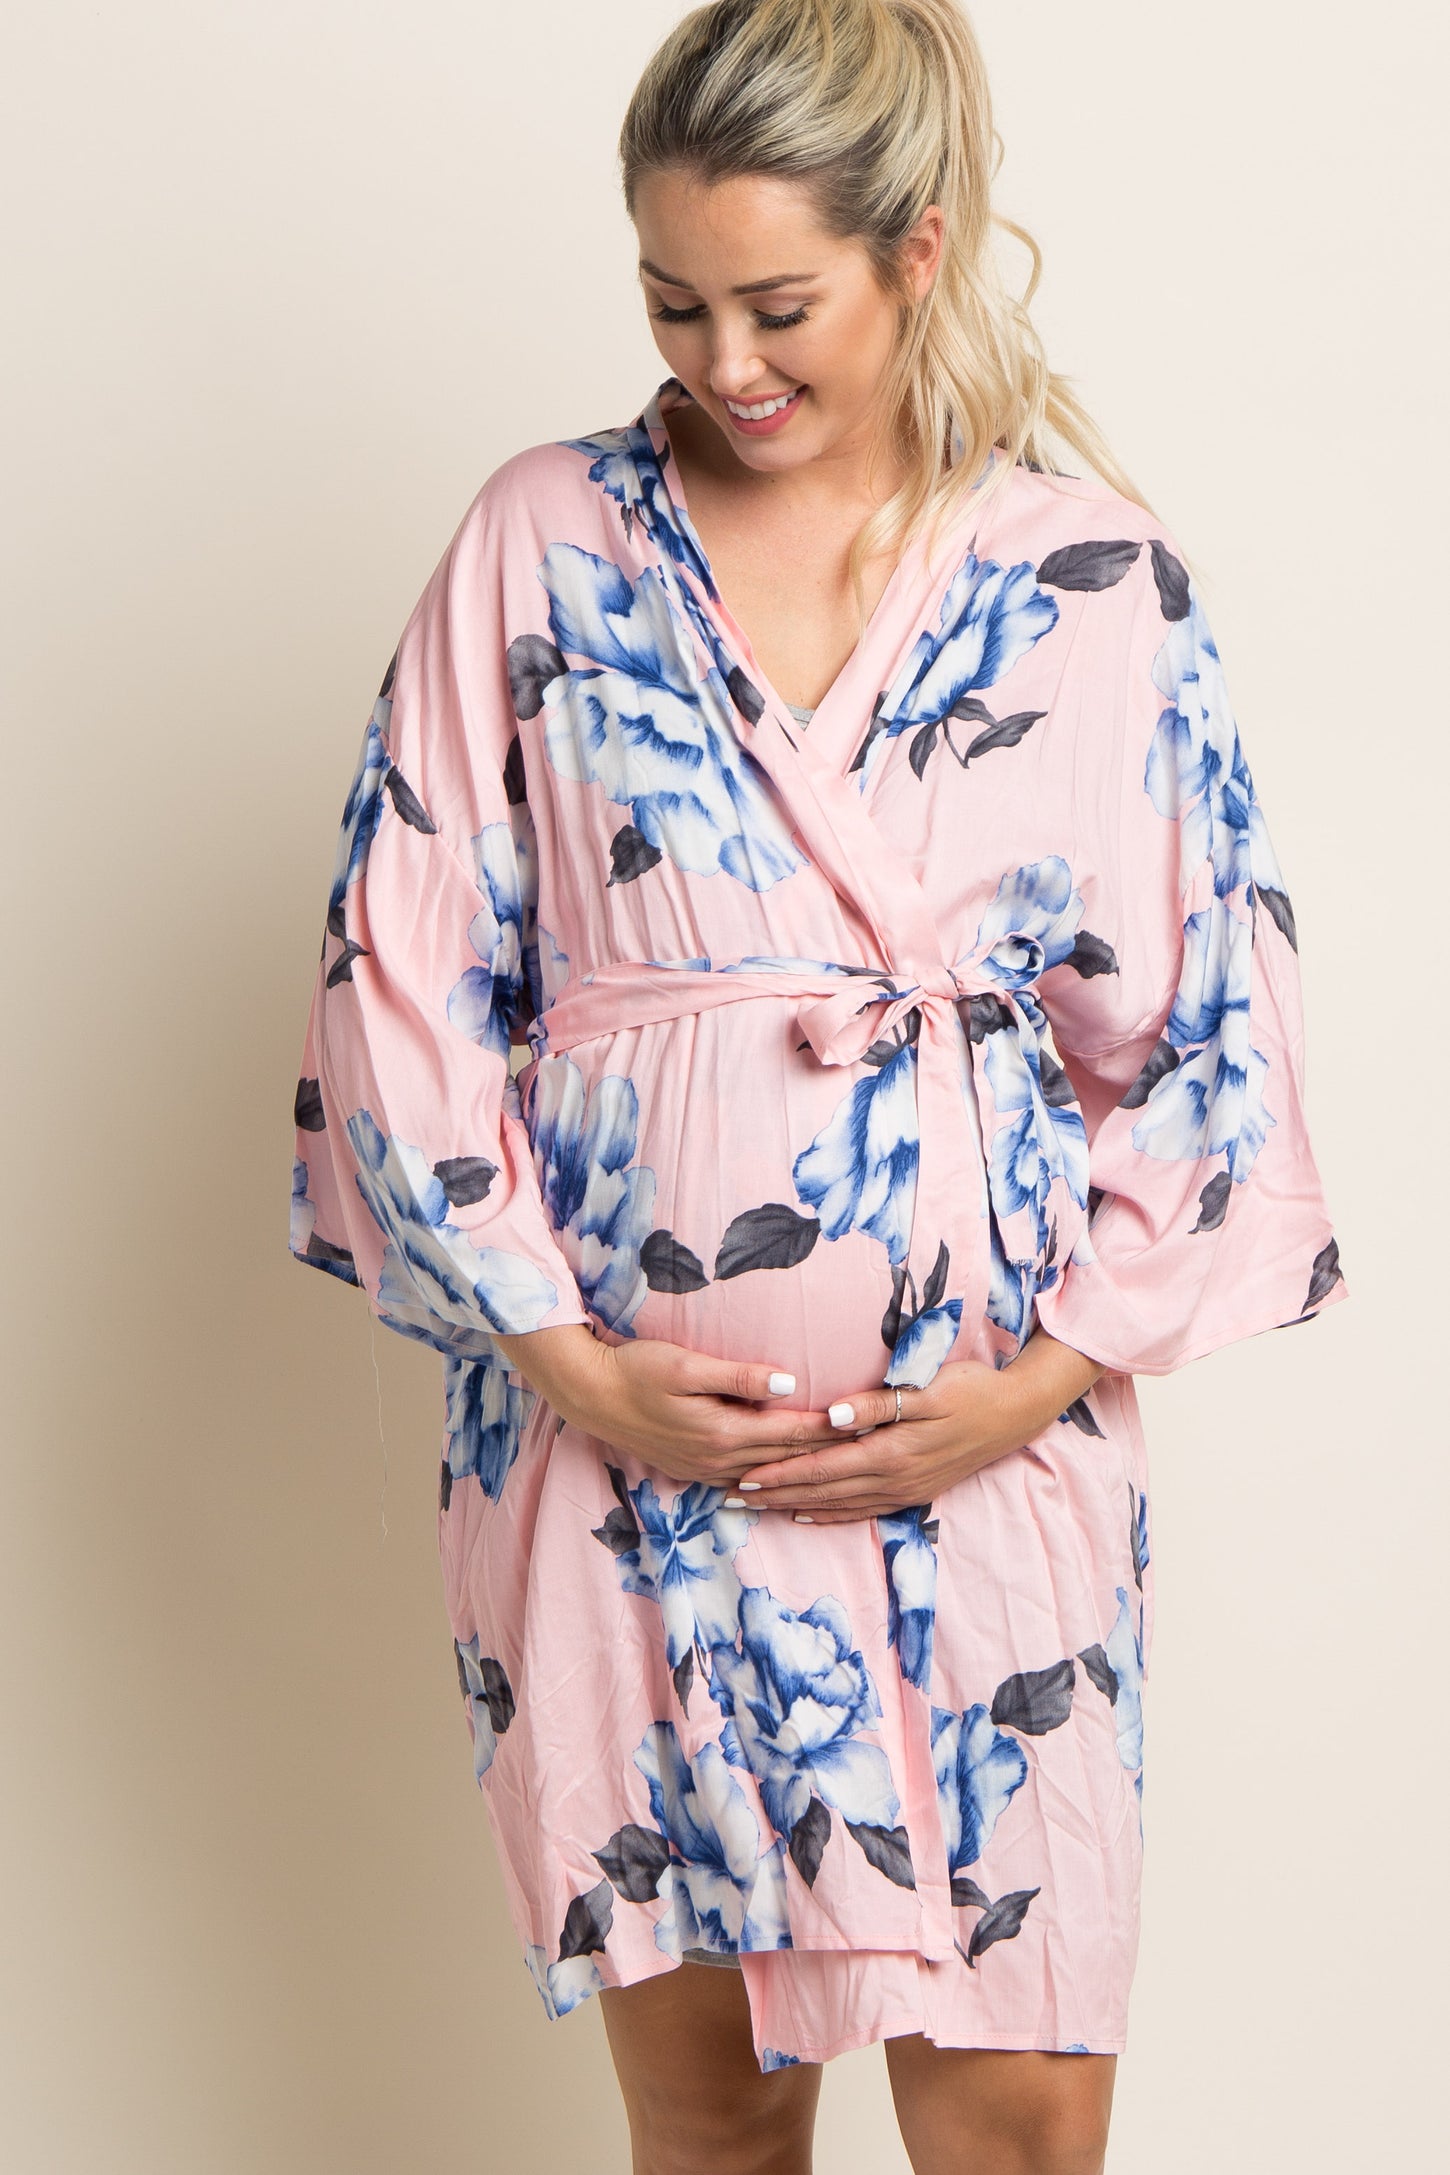 Pink Floral Print Delivery/Nursing Maternity Robe